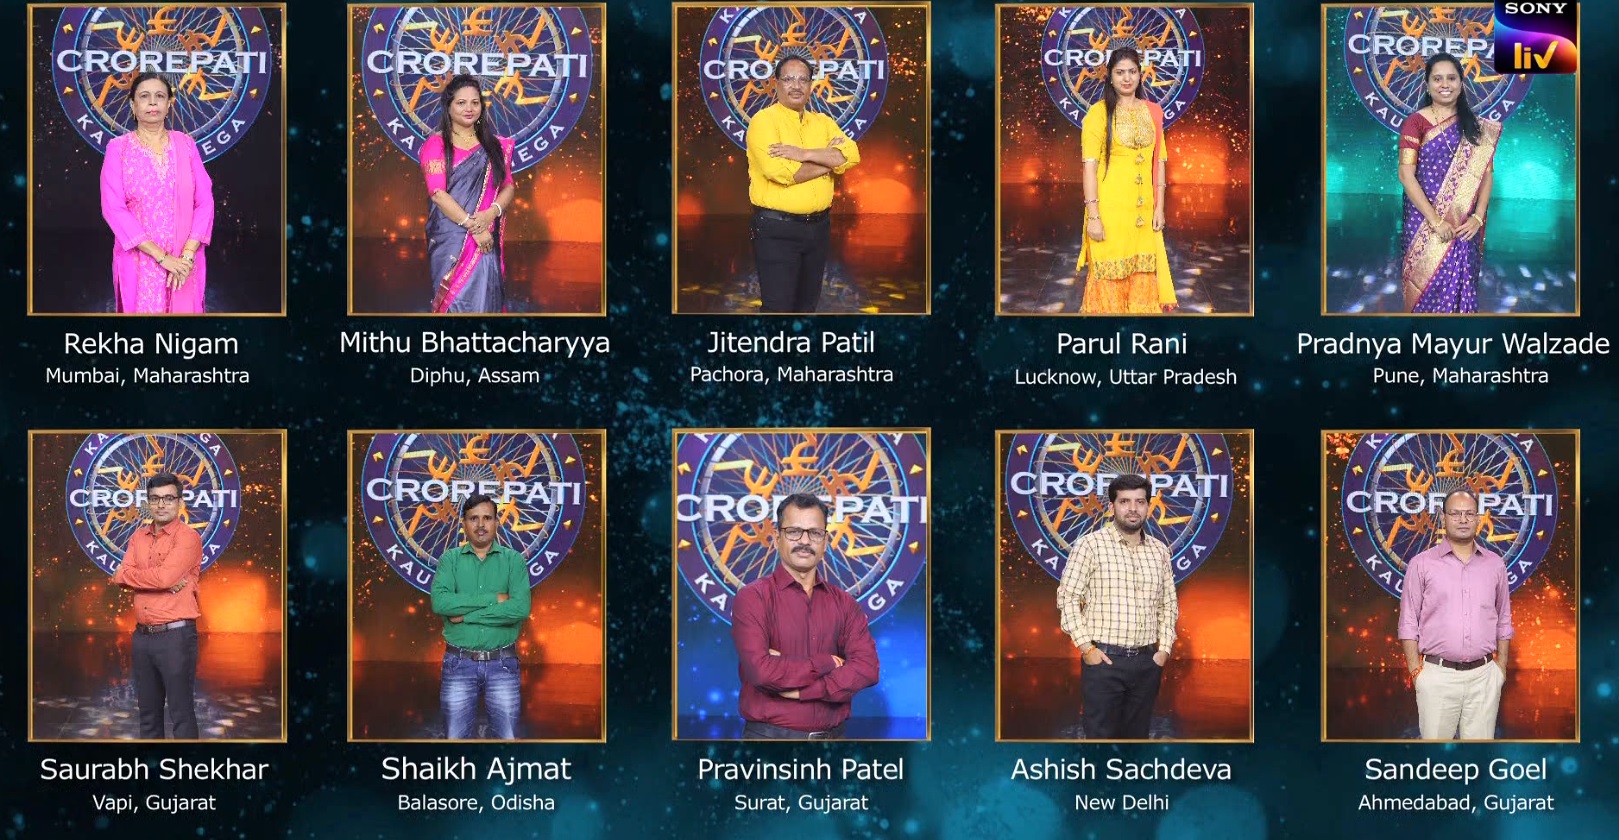 4th Friday – KBC Play Along Contestant 2022 – Top 10 Play along Contestants of the week